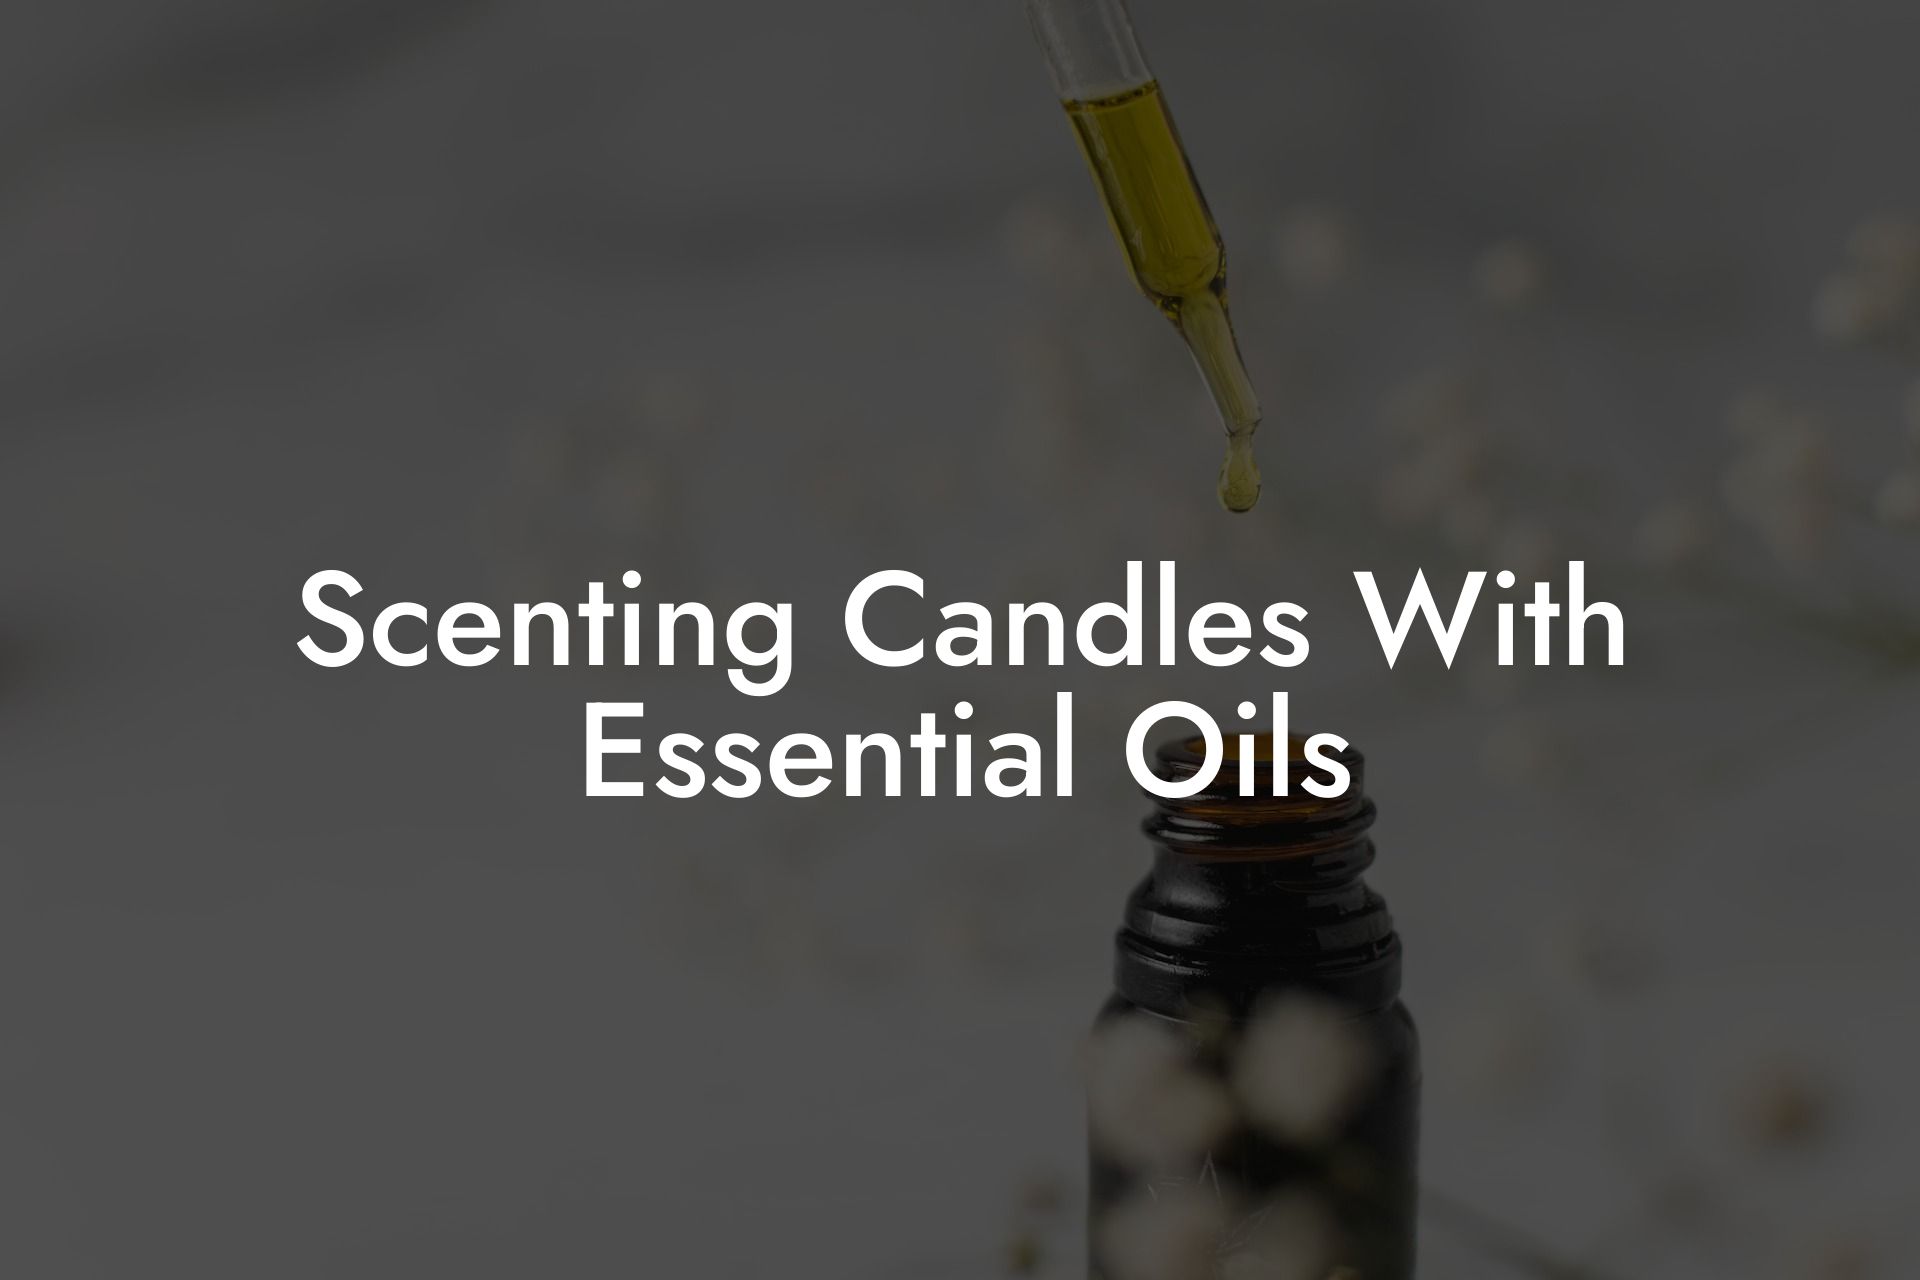 Scenting Candles With Essential Oils